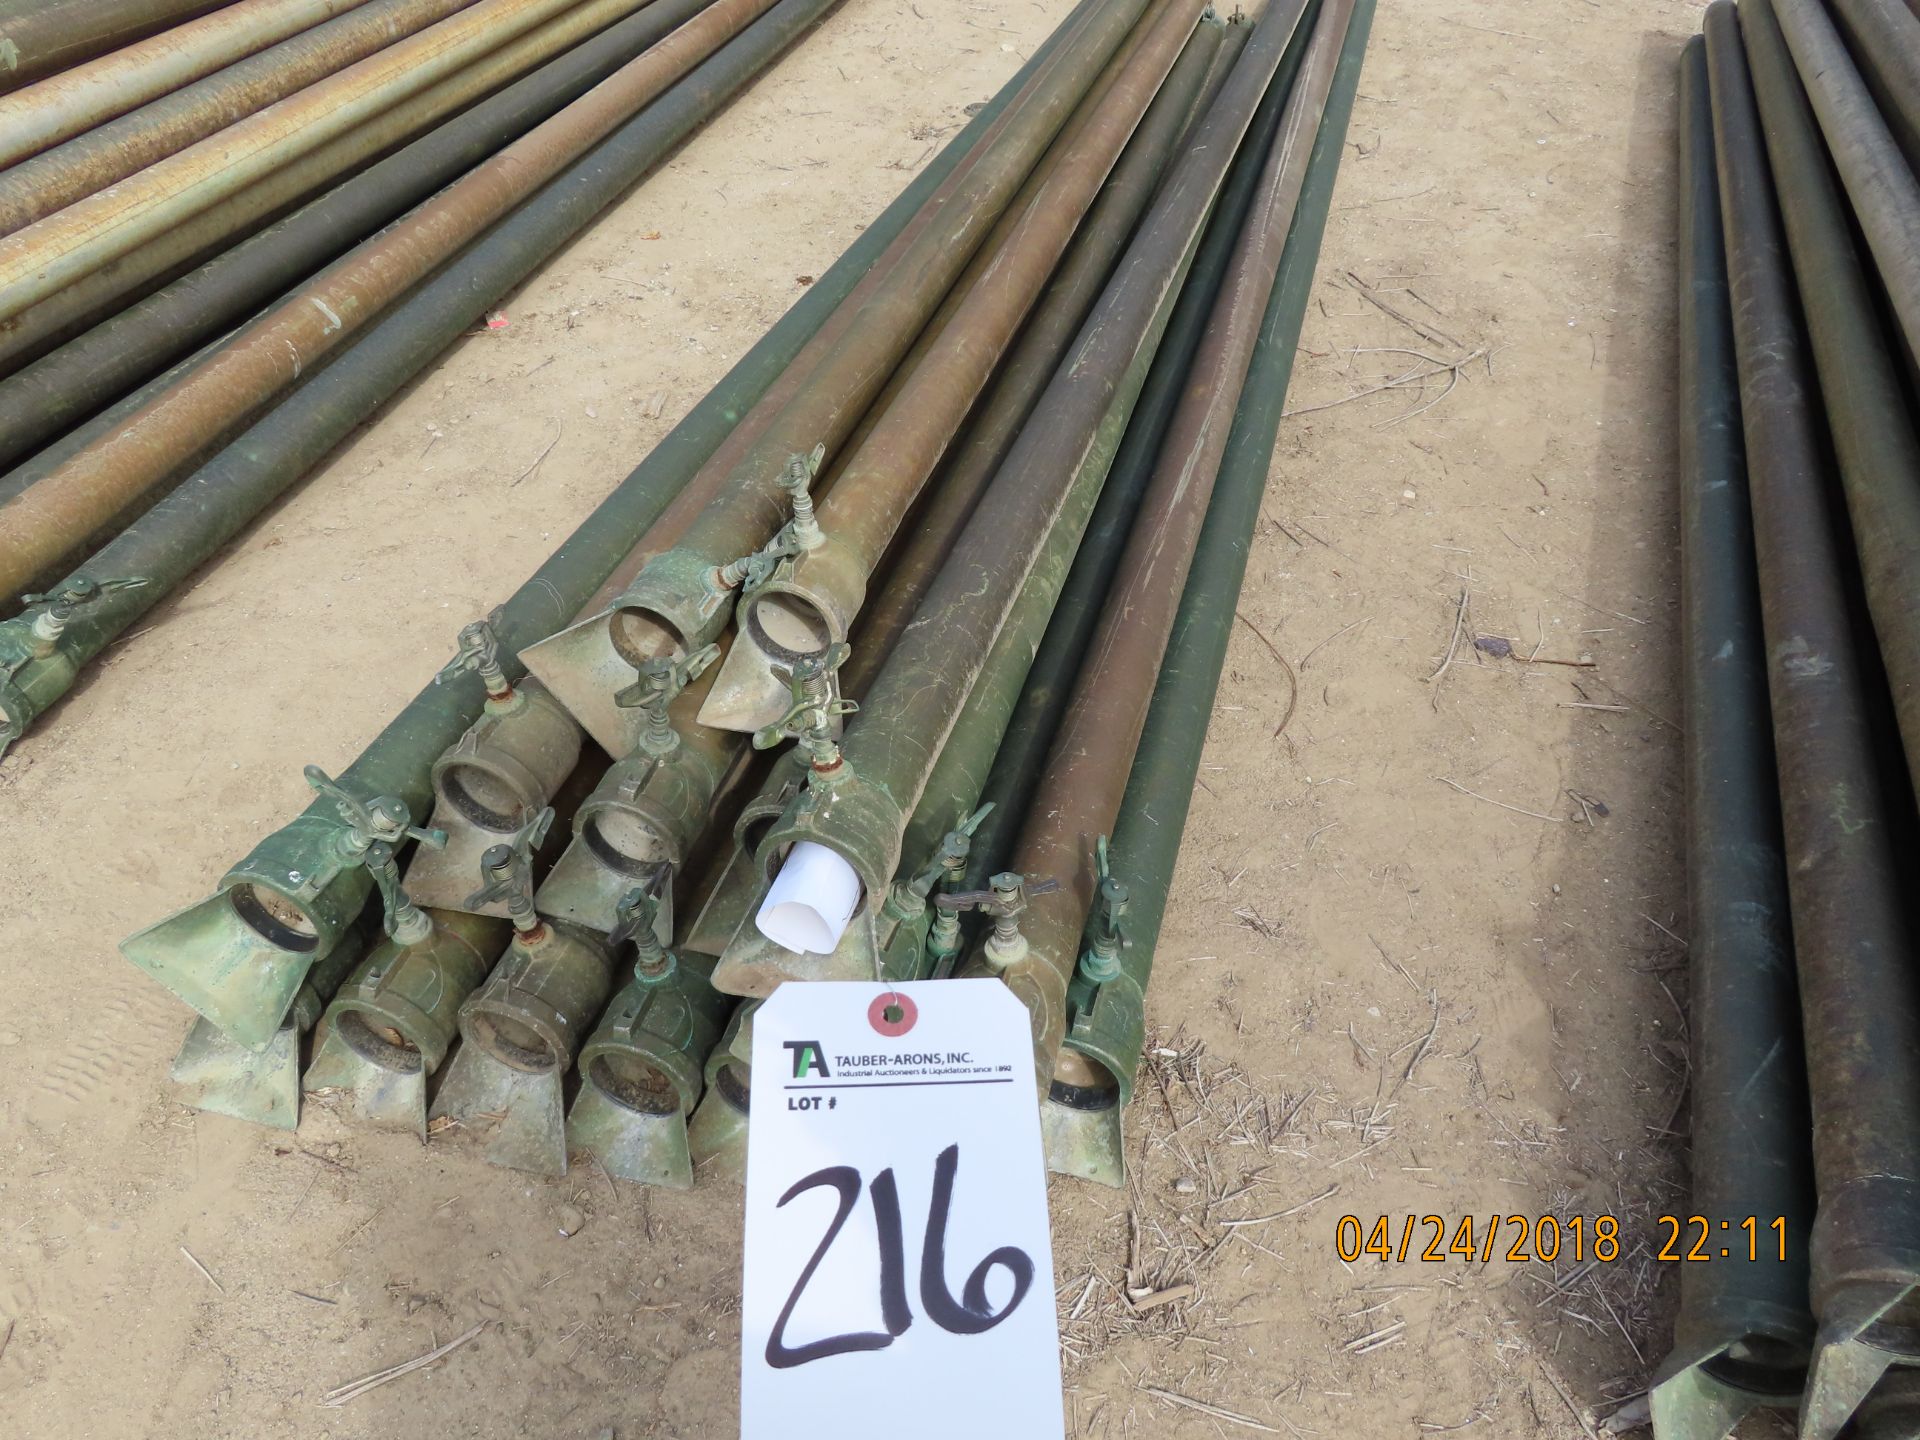 Assorted Irrigation Pipe w/ Sprinkler Heads 2', 6', 8', 10', 12' & 15'L x 4'' Dia., Aluminum - Image 3 of 5